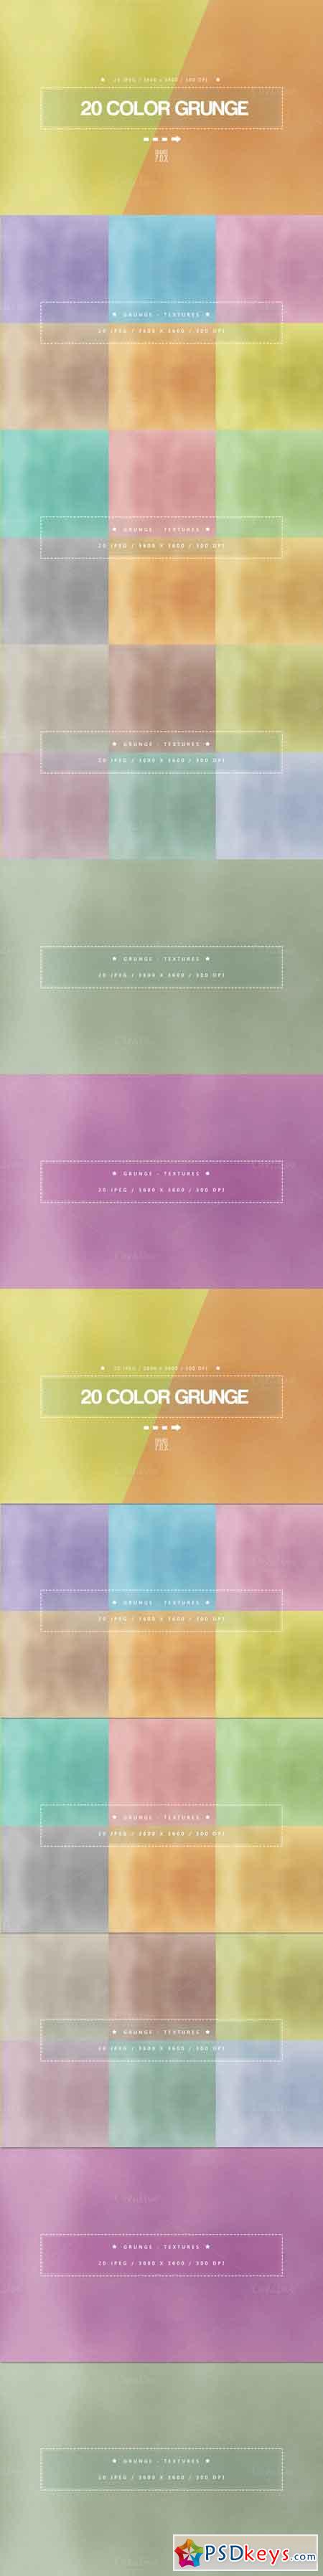 20 Color Grunge Texture 671450